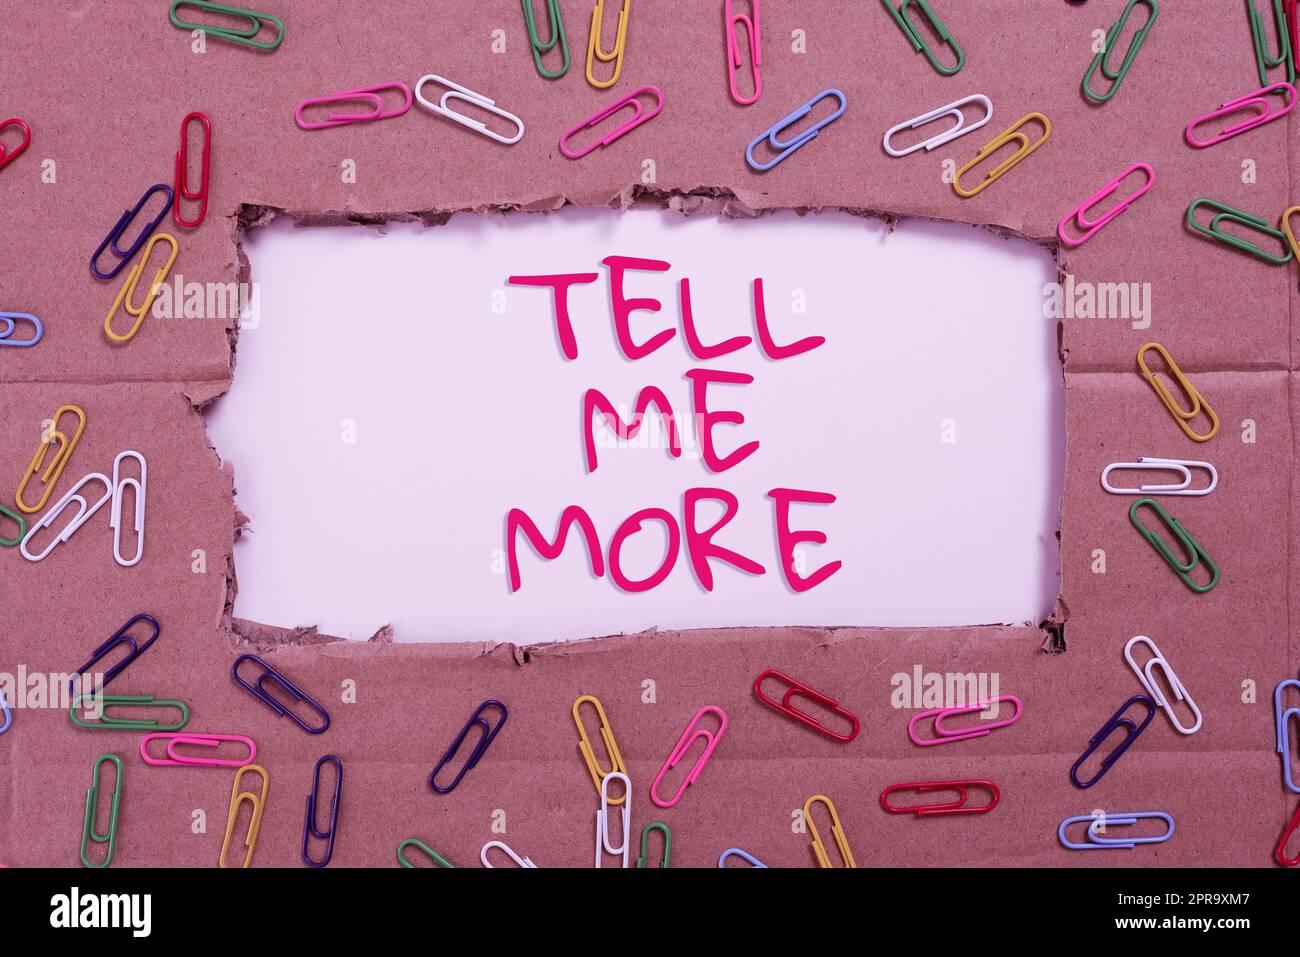 Text sign showing Tell Me More. Business approach A call to start a conversation Sharing more knowledge Important Ideas Written Under Ripped Cardboard With Paperclips Around. Stock Photo